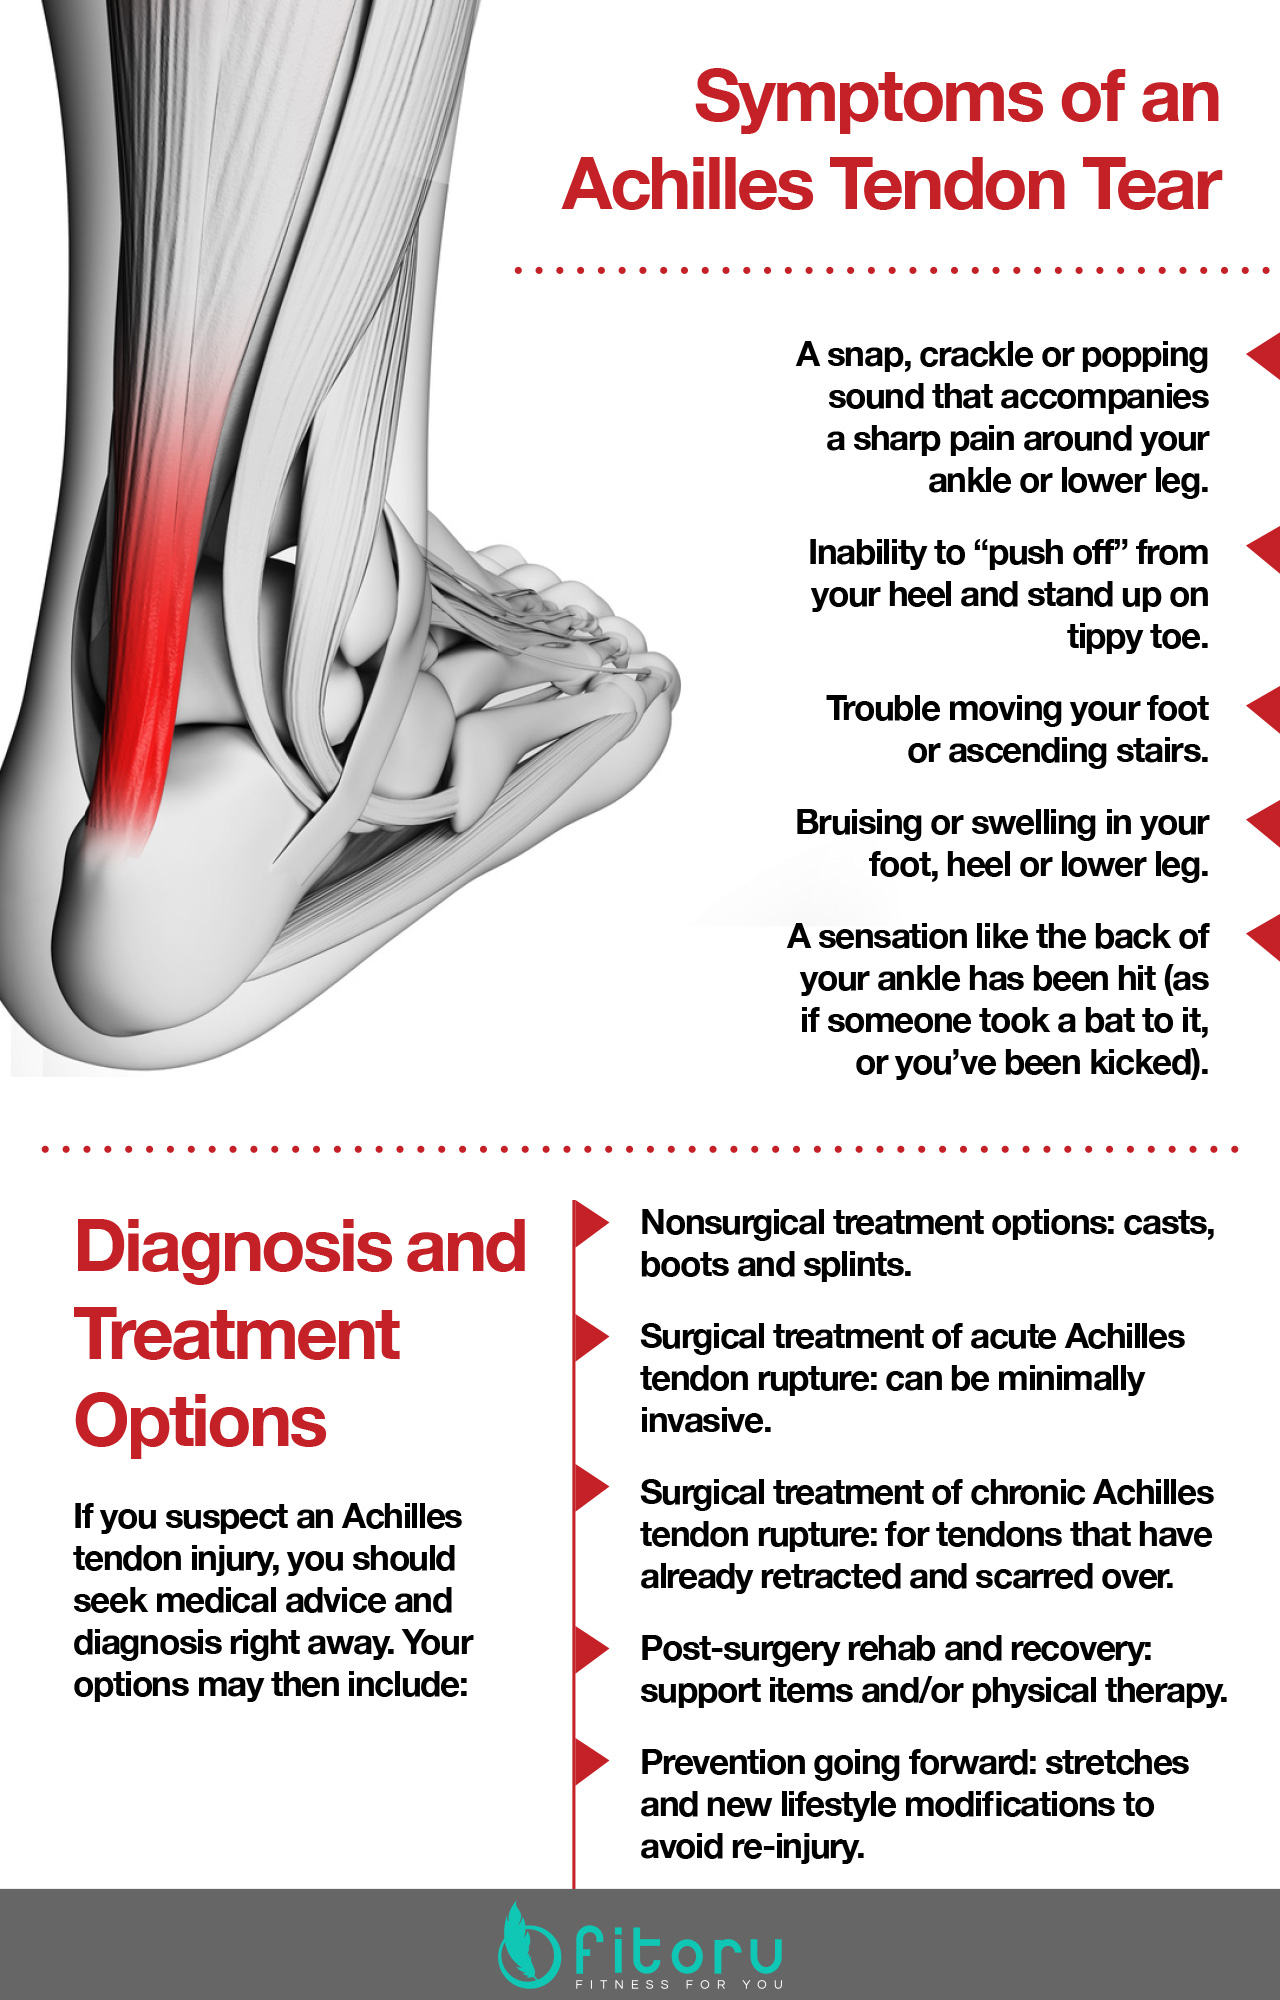 Achilles tendon tears: treatment options and advice.